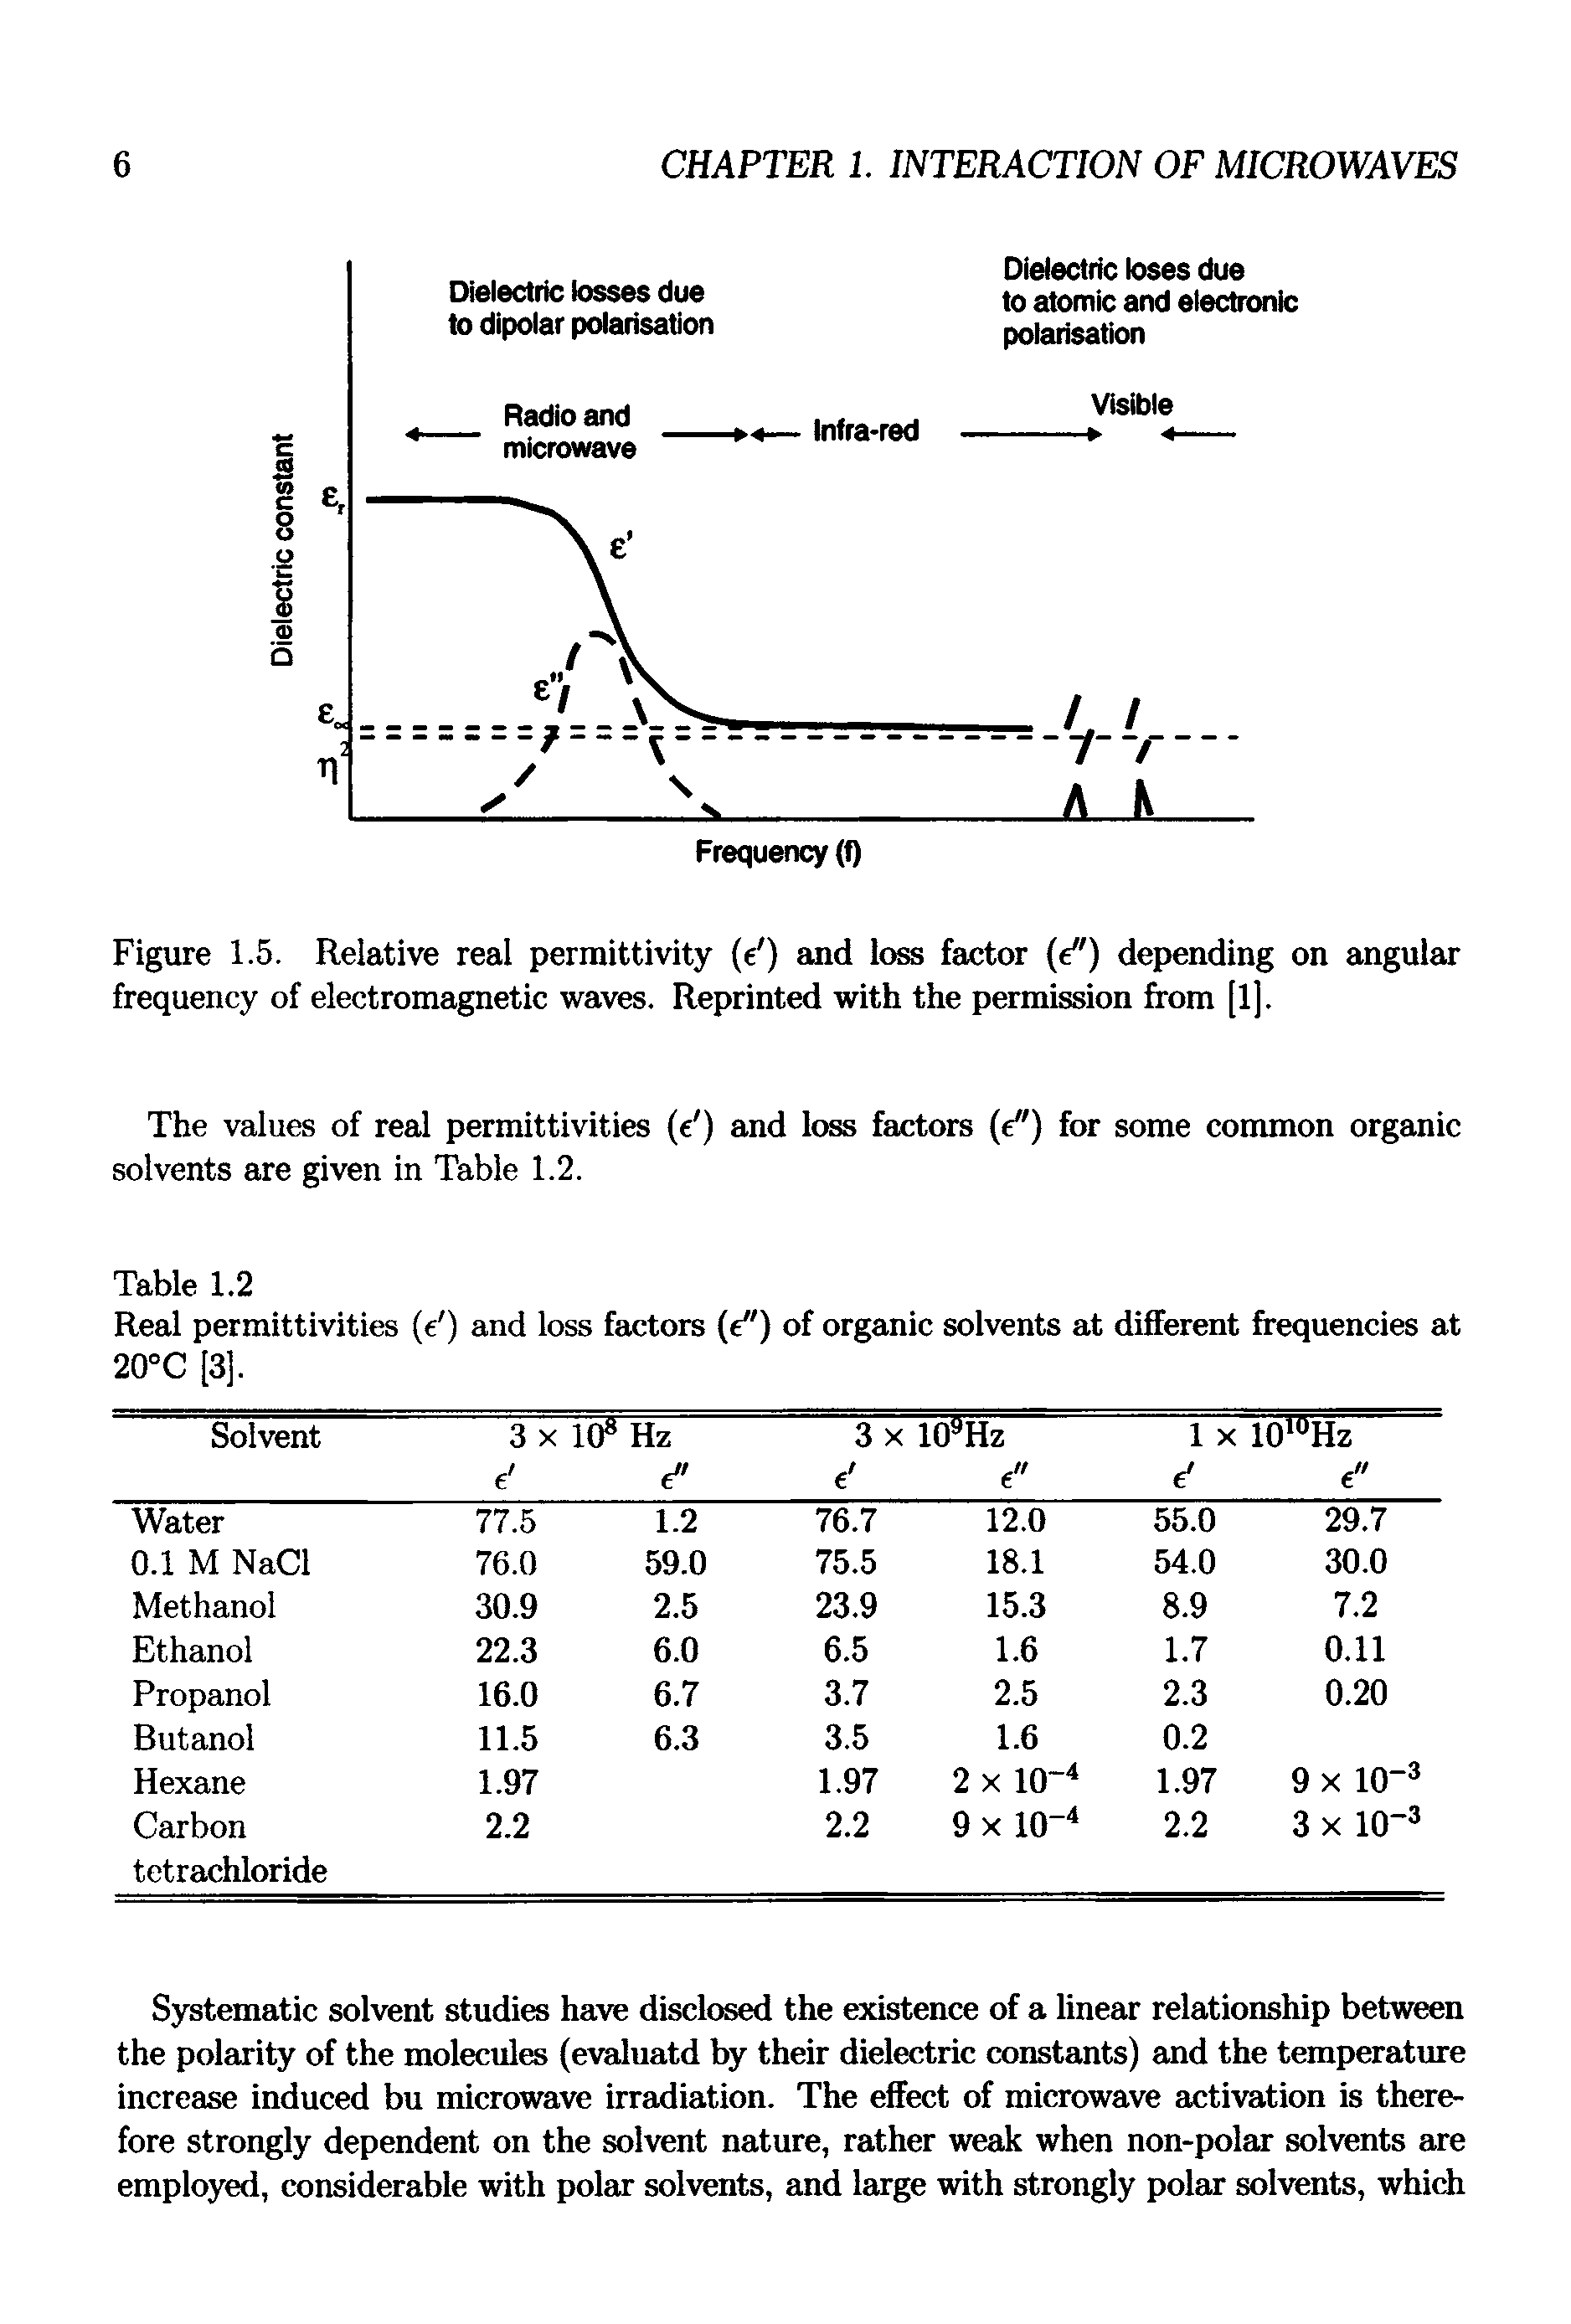 Figure 1.5. Relative real permittivity (e ) and loss factor (e") depending on angular frequency of electromagnetic waves. Reprinted with the permission from [1].